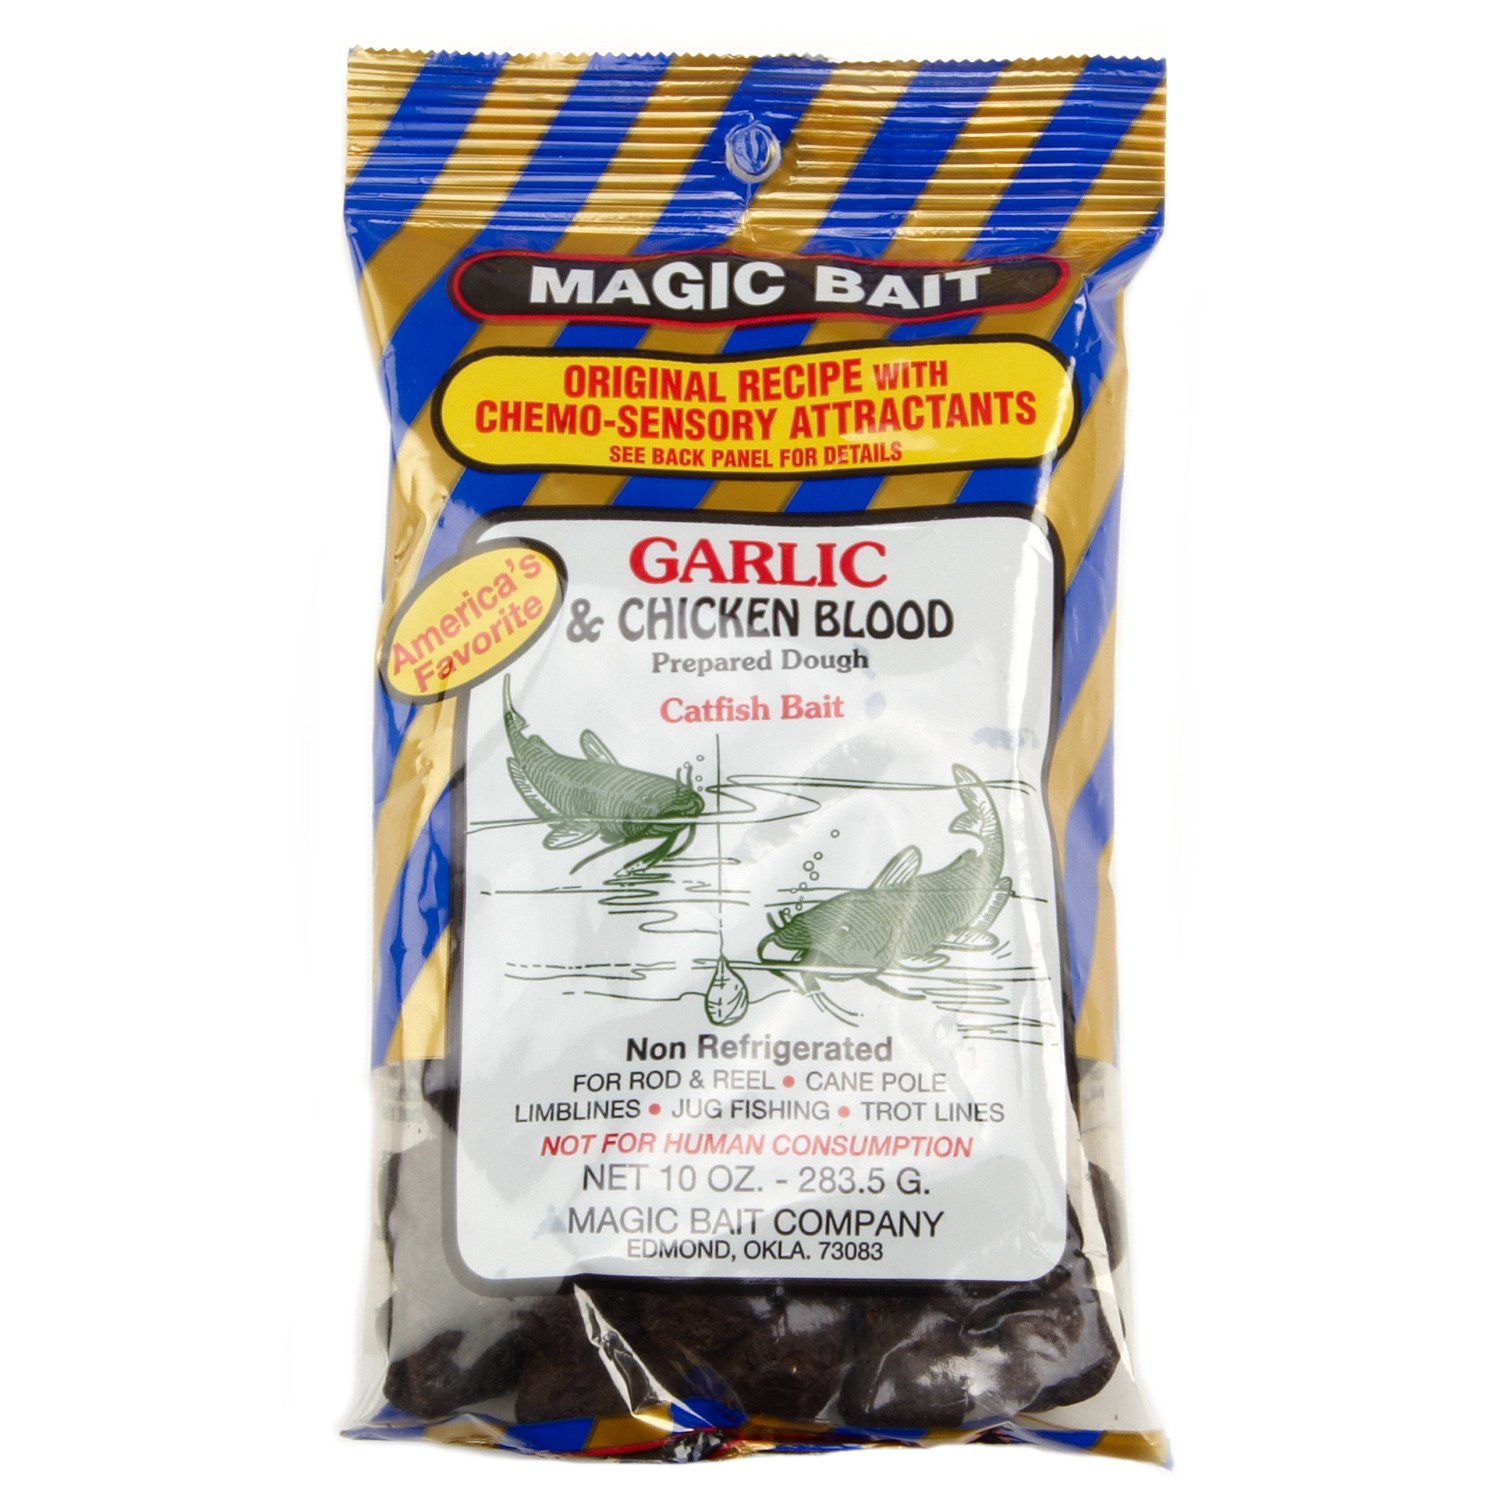 Bait-Pop Live Sonar Intensifier Jacob Wheeler Pro Pack JC Pro Pack - Fish Attrct/Bait and Acces at Academy Sports